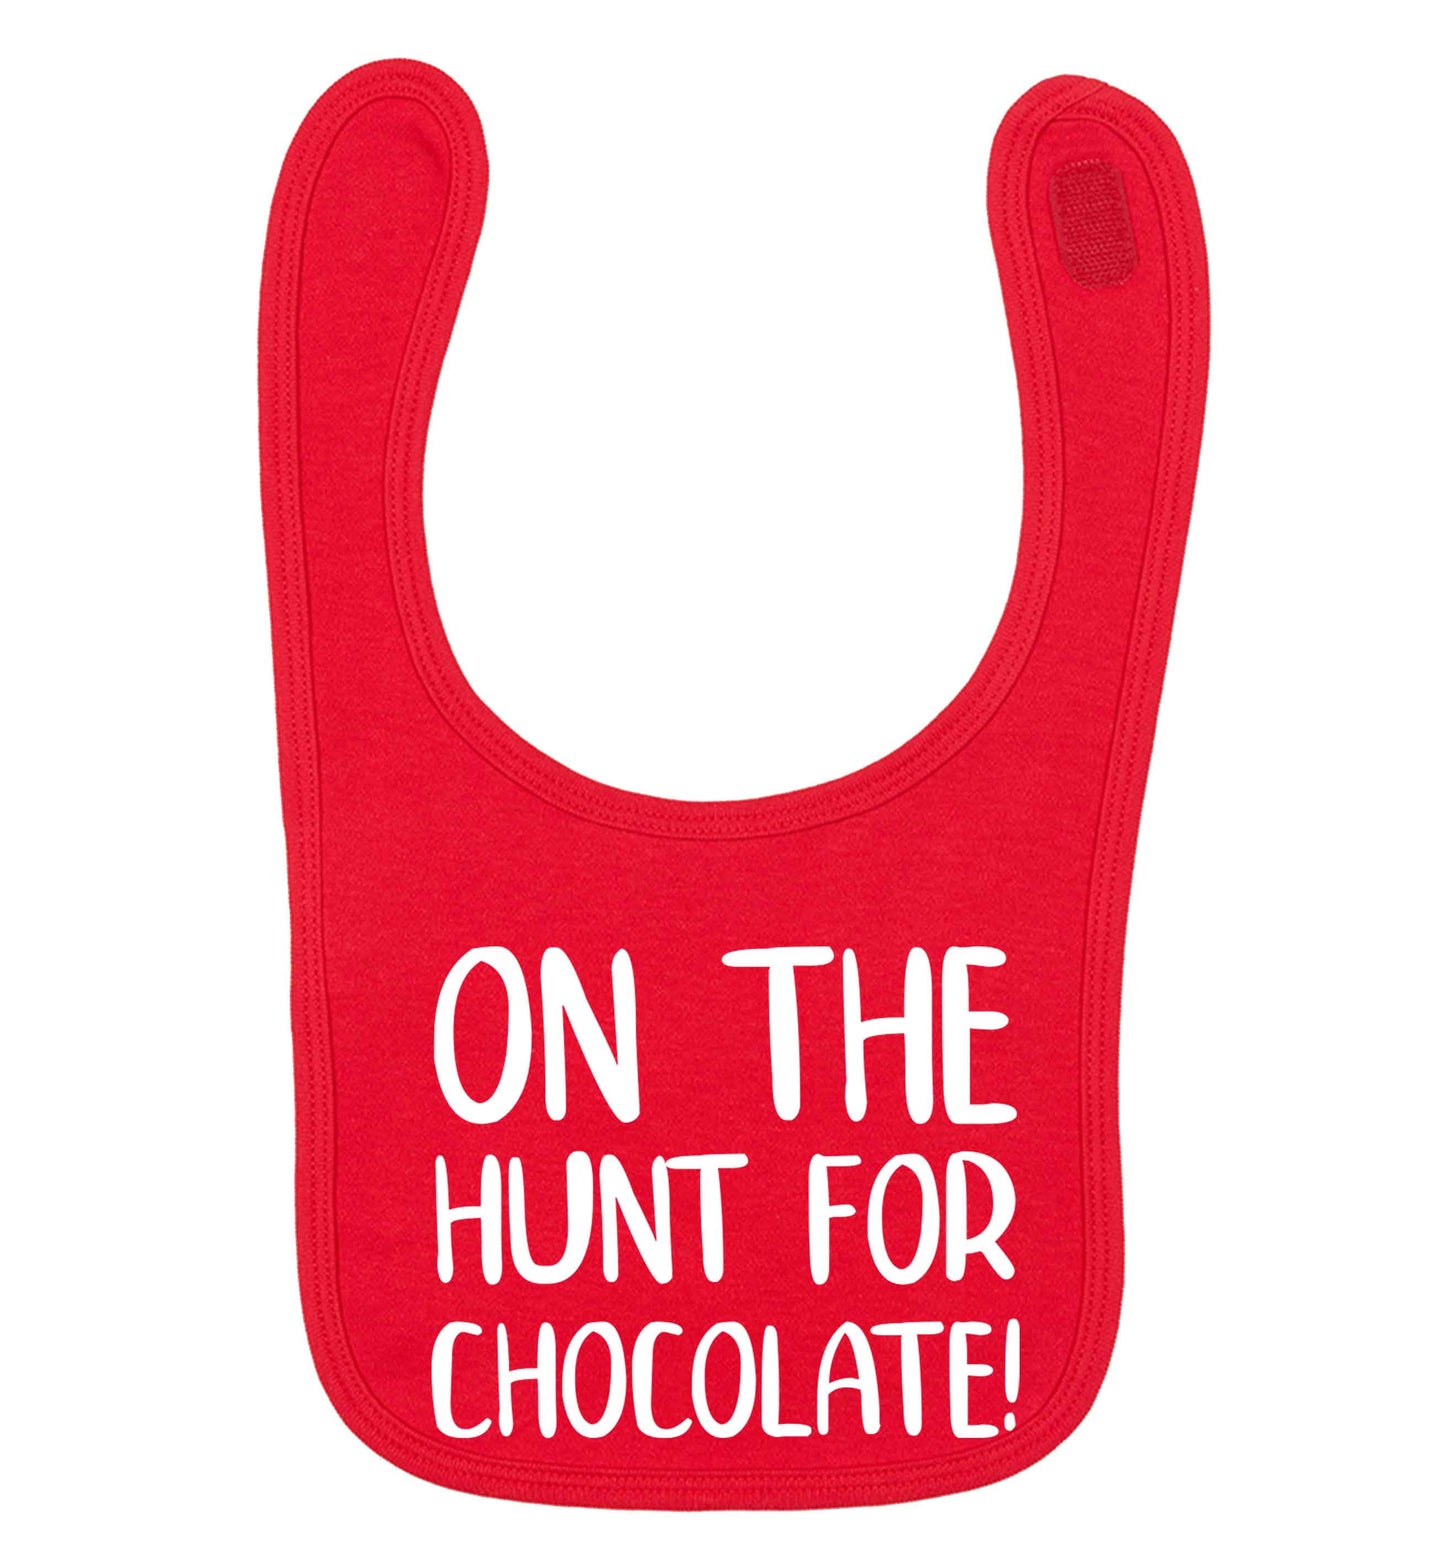 On the hunt for chocolate! red baby bib